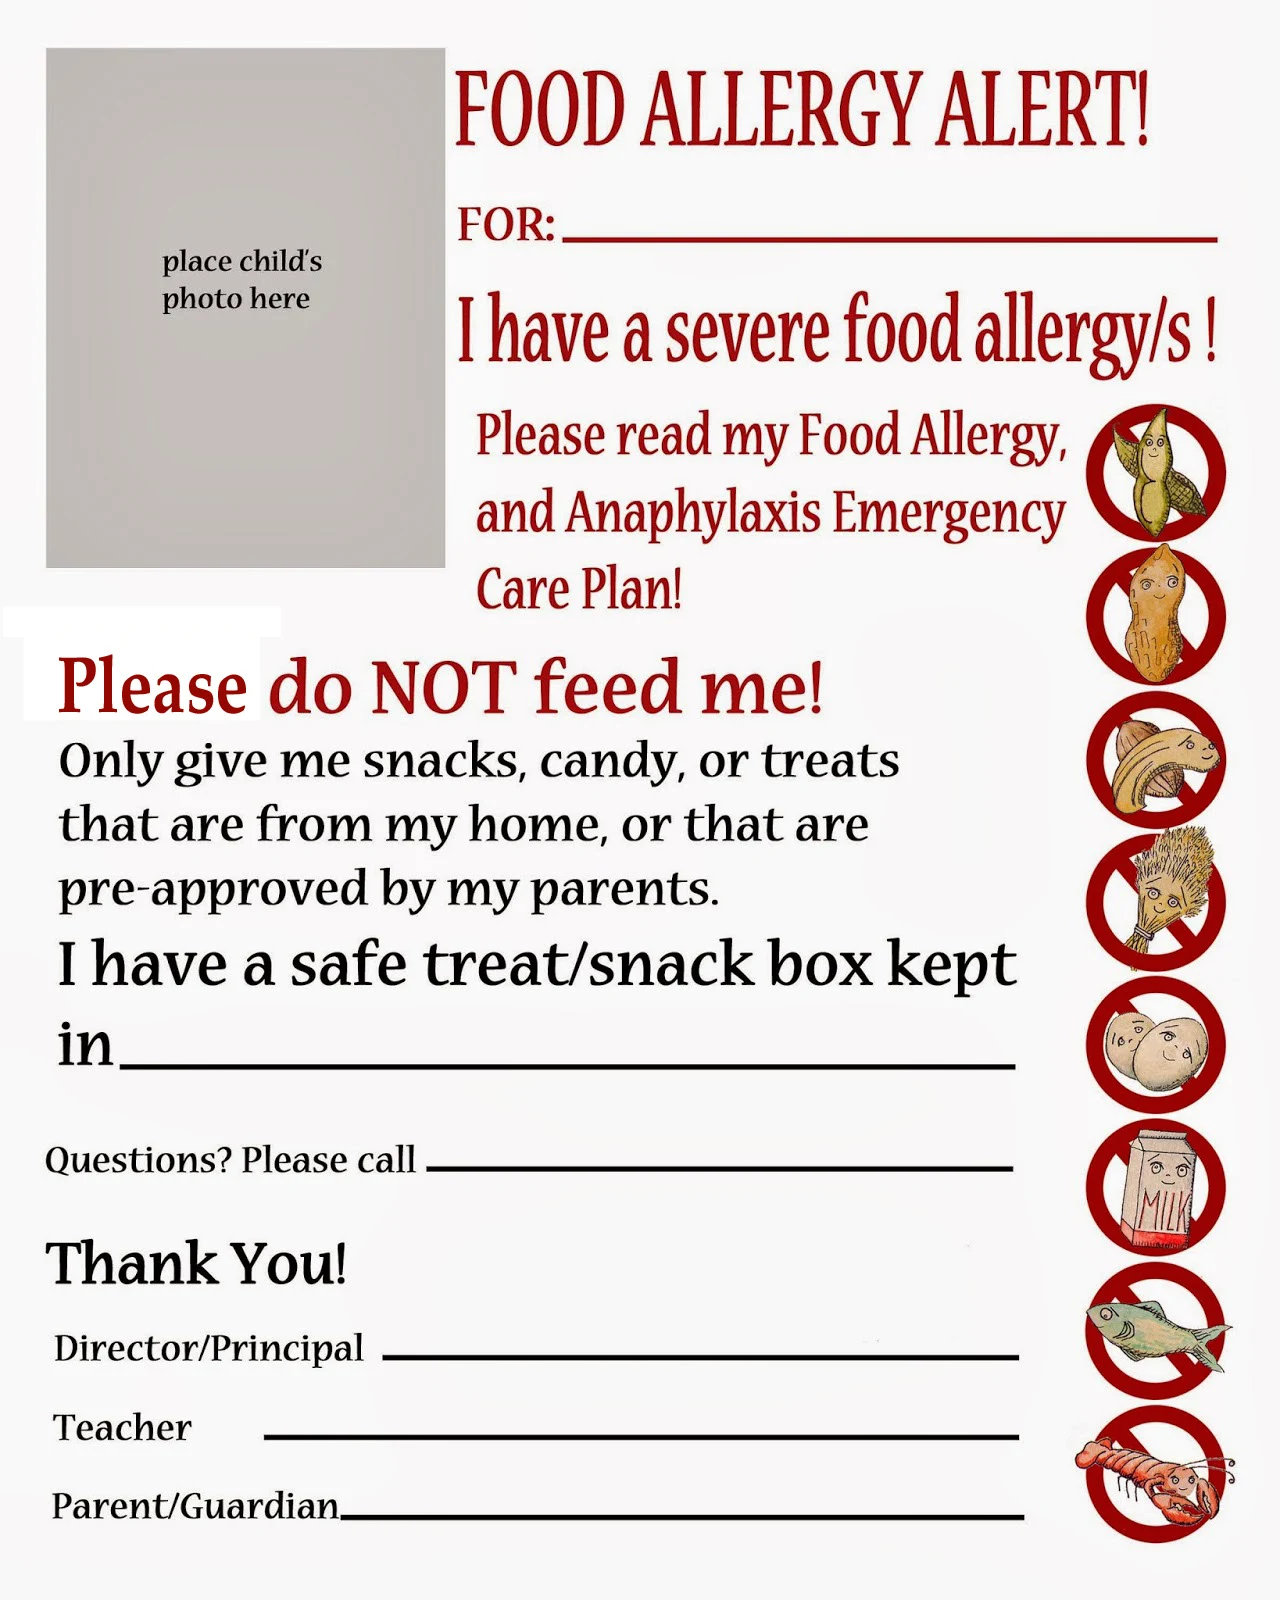 Thriving With Allergies Peanut, treenut free classroom poster, Food